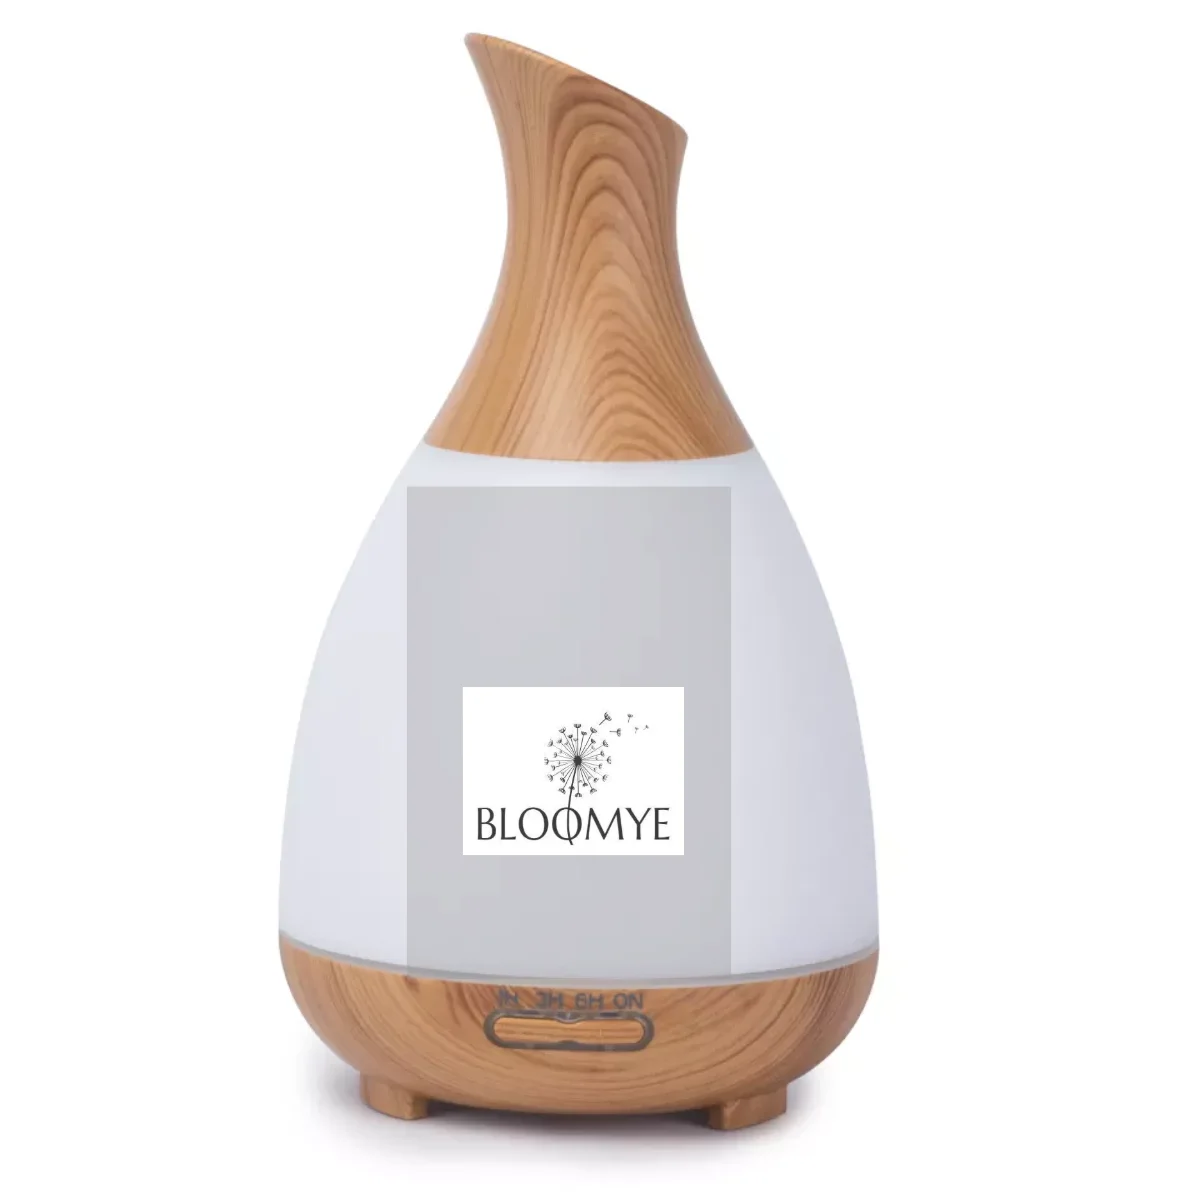 New Flower Vase Electric Air Freshener Danq Humidifier Luchtbevochtiger Essential Oil Aroma Humidifier - Buy Essential Oil Aroma Diffuser,Humidifier Price,Ultrasonic Humidifier Product on Alibaba.com